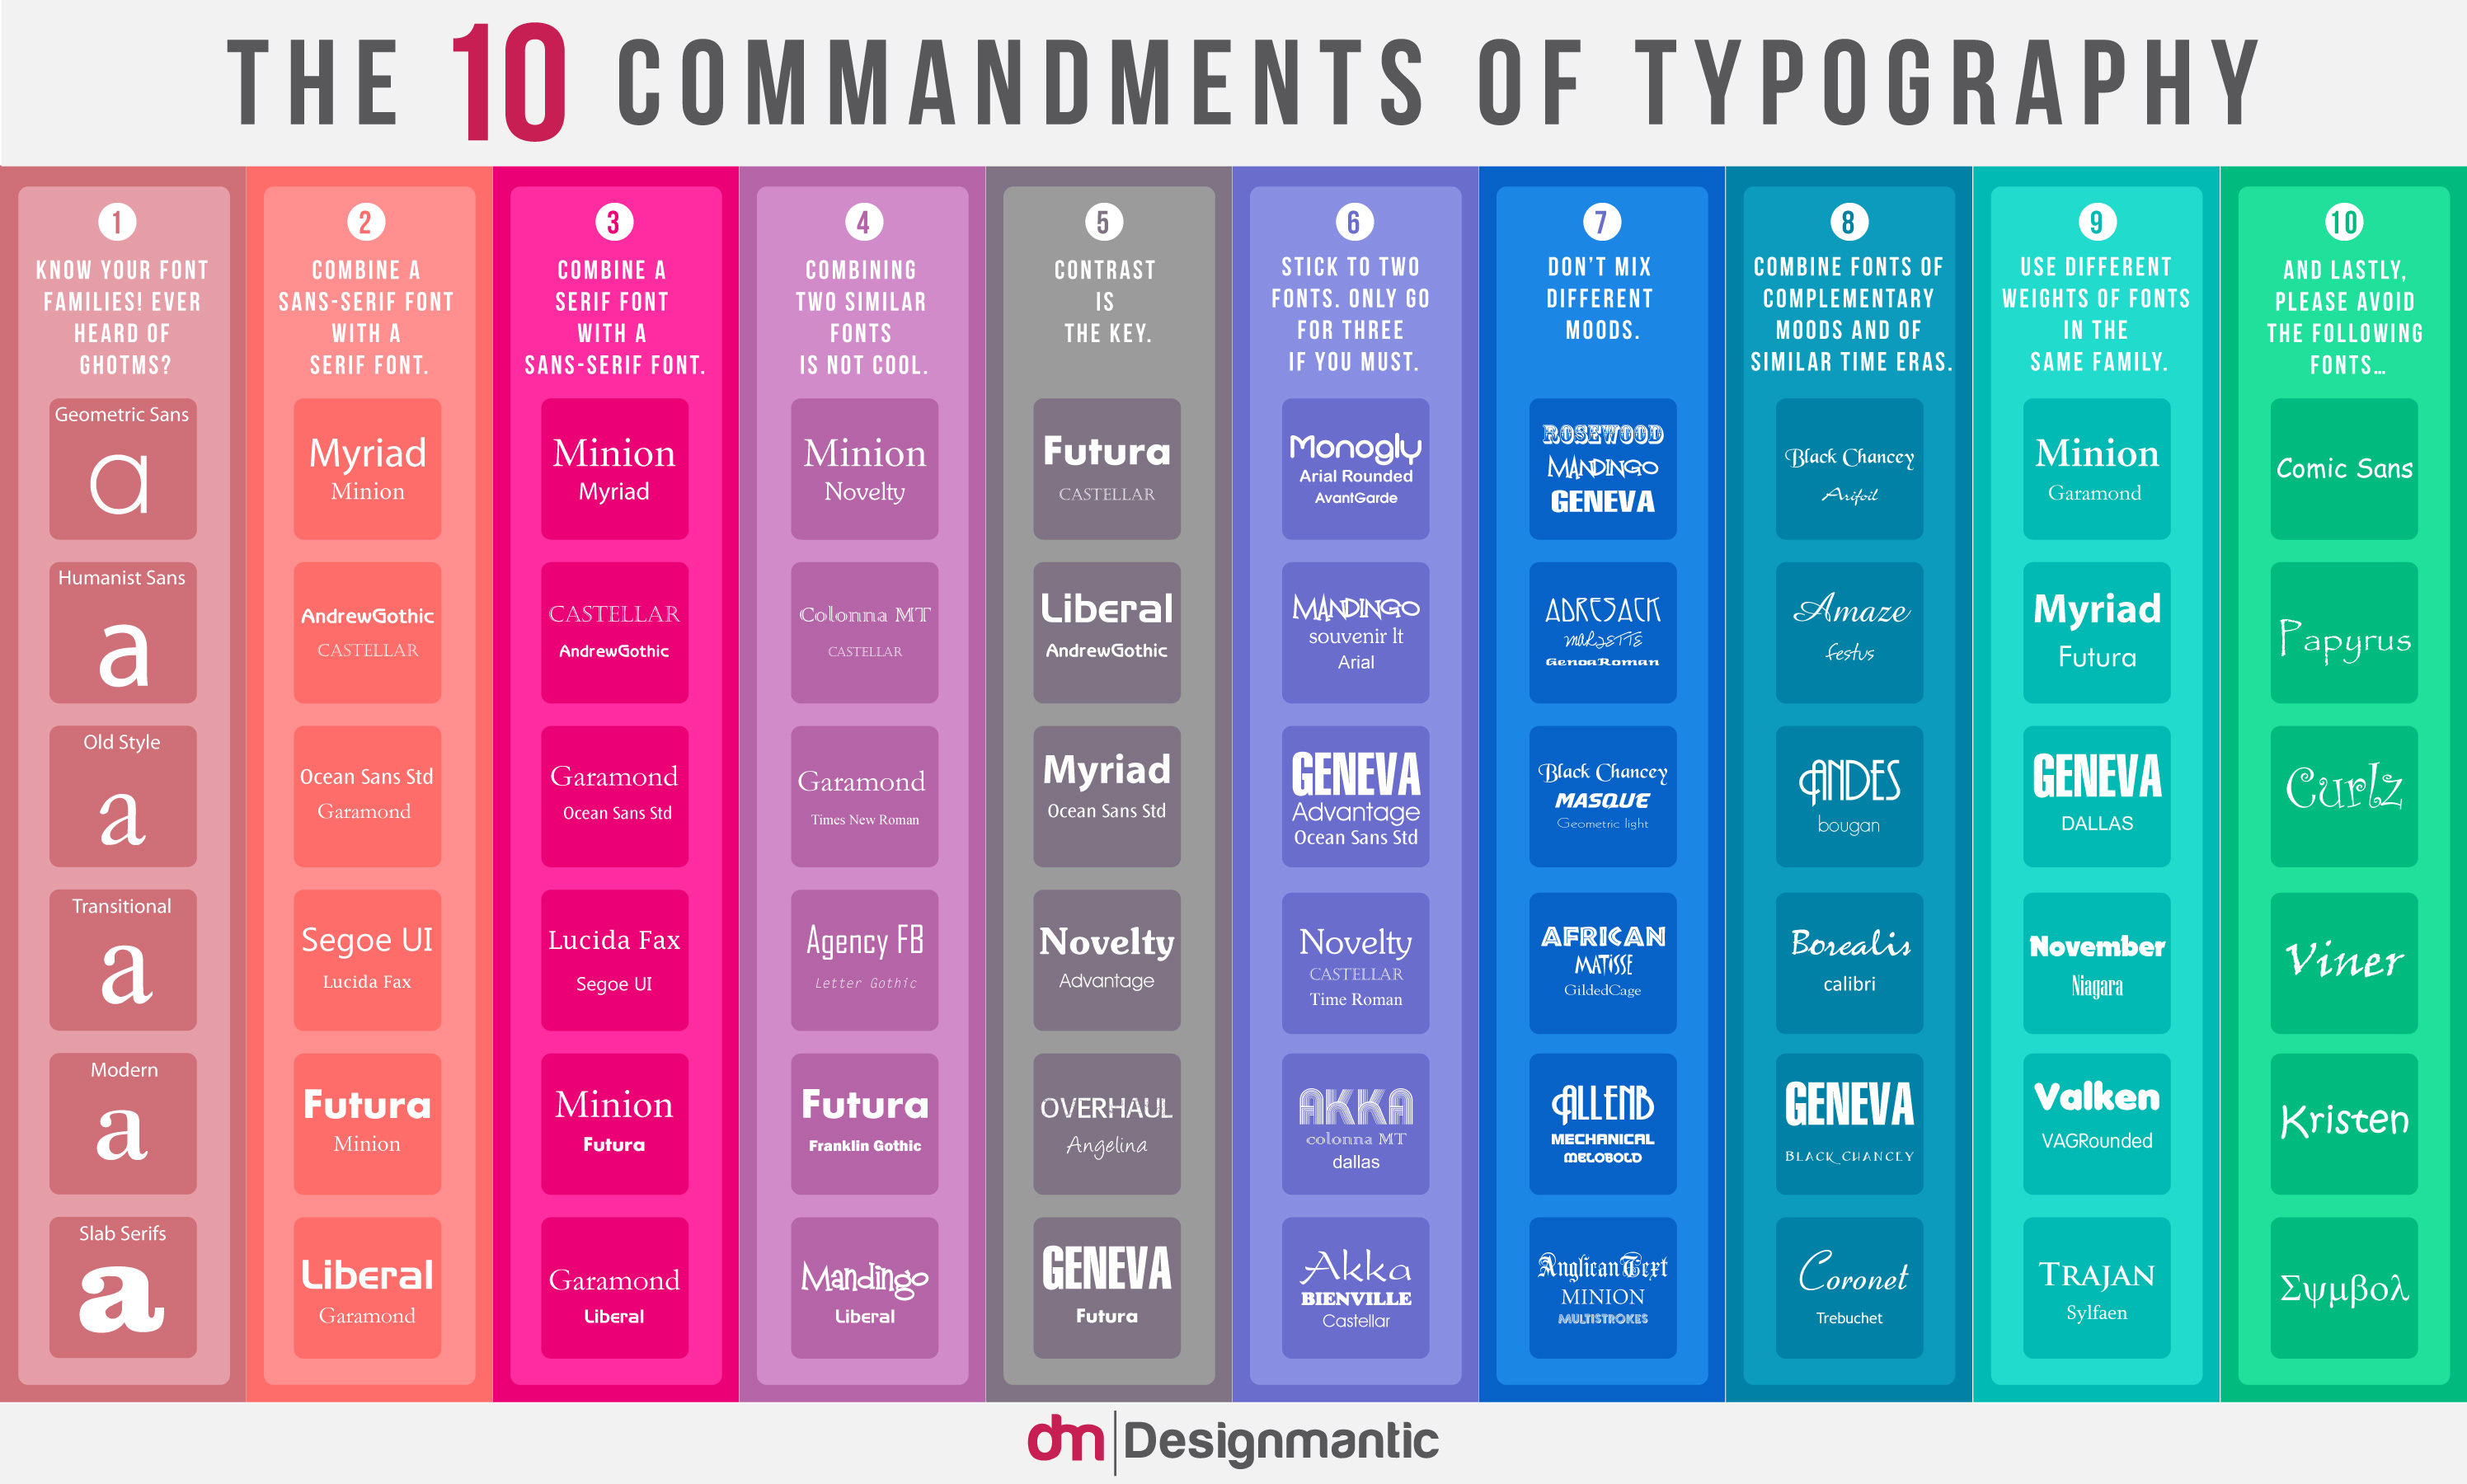 [INFOGRAPHIC]: The 10 Commandments of Typography